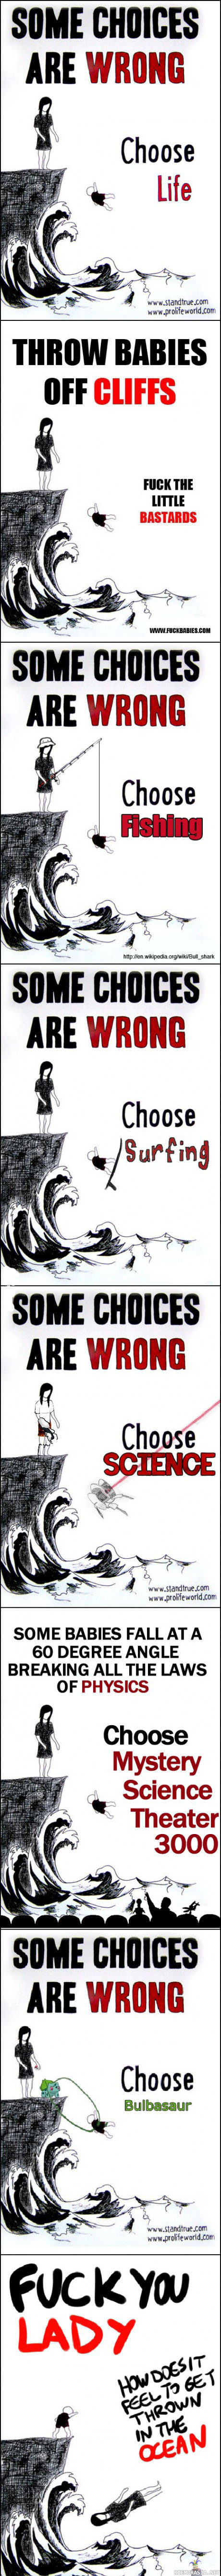 some choices are wrong - vaavi mereen